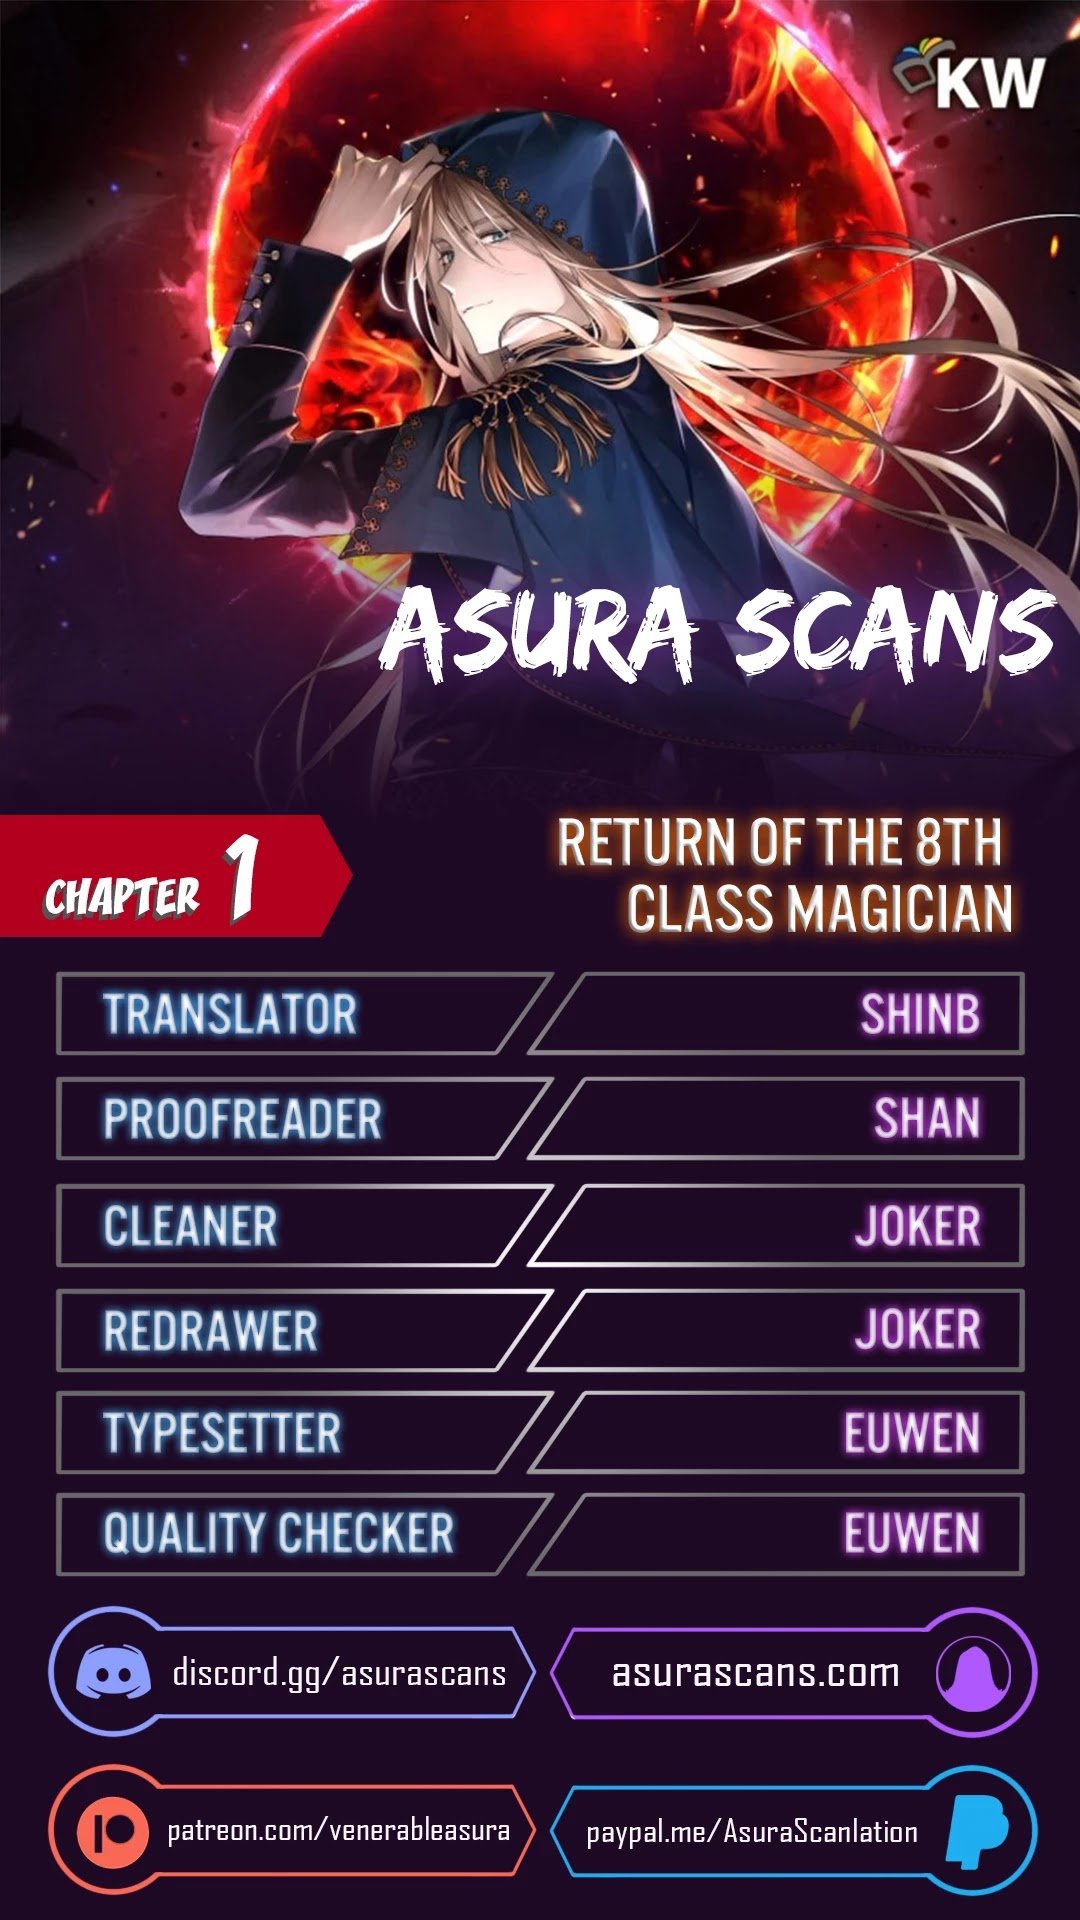 Return of the 8th class Magician chapter 1